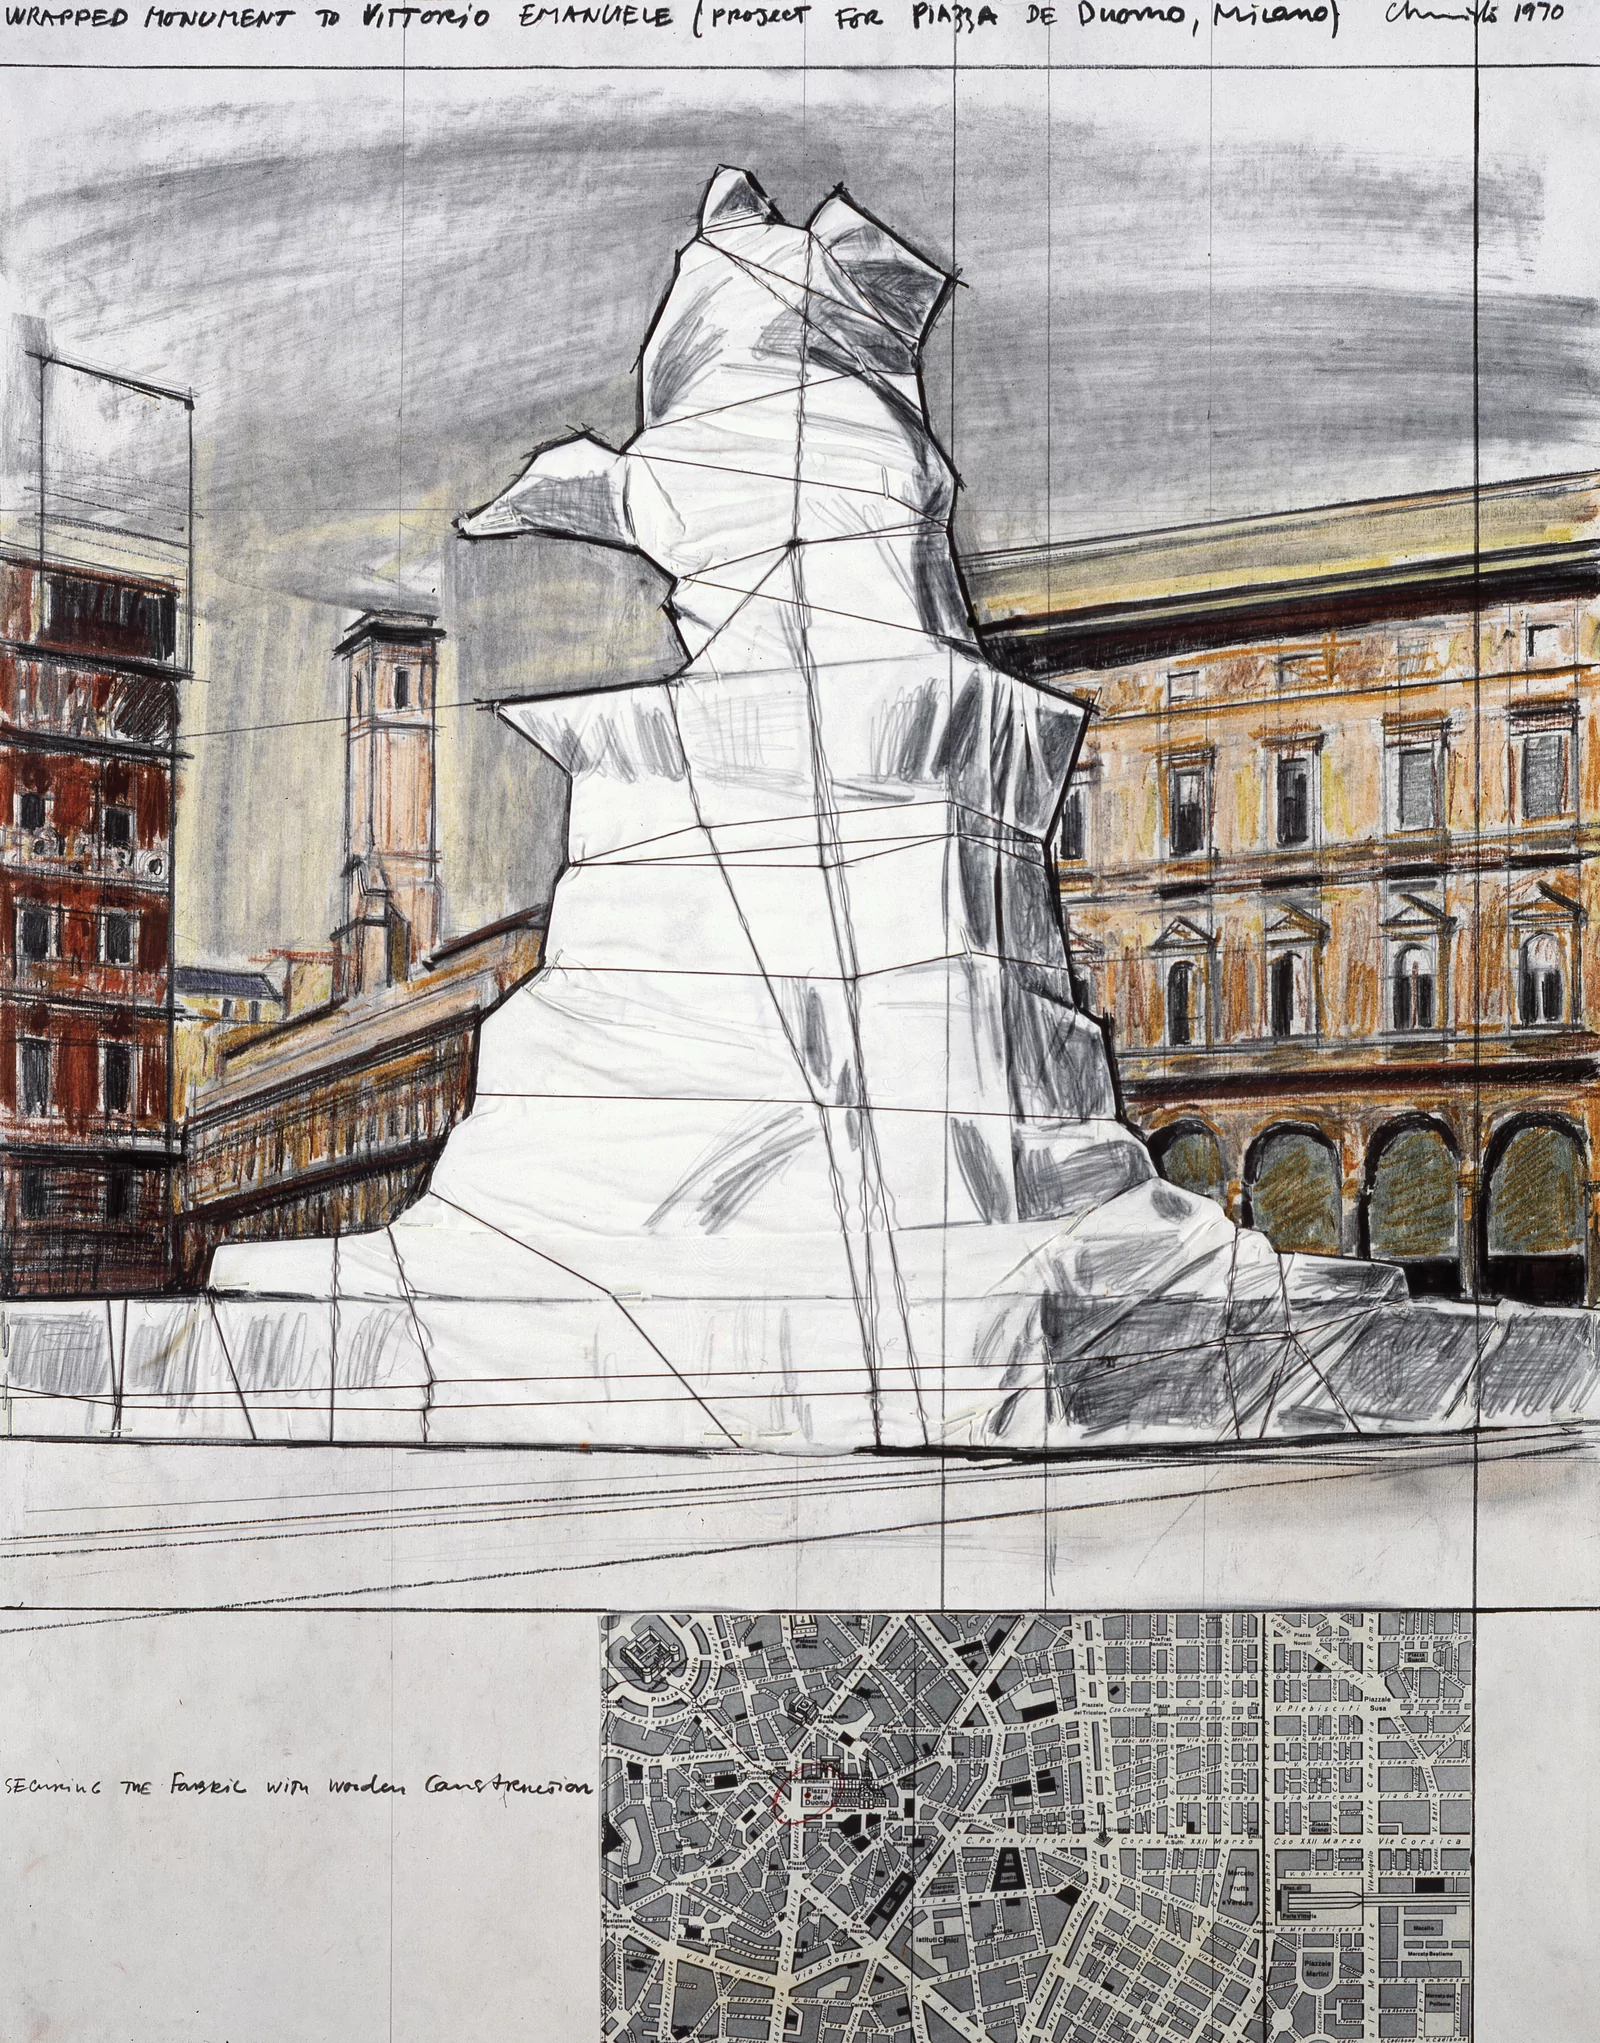 Christo Wrapped Monument to Vittorio Emanuele (Project for Piazza de Duomo, Milano) Collage 1970 Pencil, fabric, twine, charcoal, pastel, wax crayon, and map 71 x 56 cm (28 x 22 in) — Victoria and Albert Museum, London, United Kingdom Photo: Shunk-Kender © 1970 Christo and Jeanne-Claude Foundation and J. Paul Getty Trust